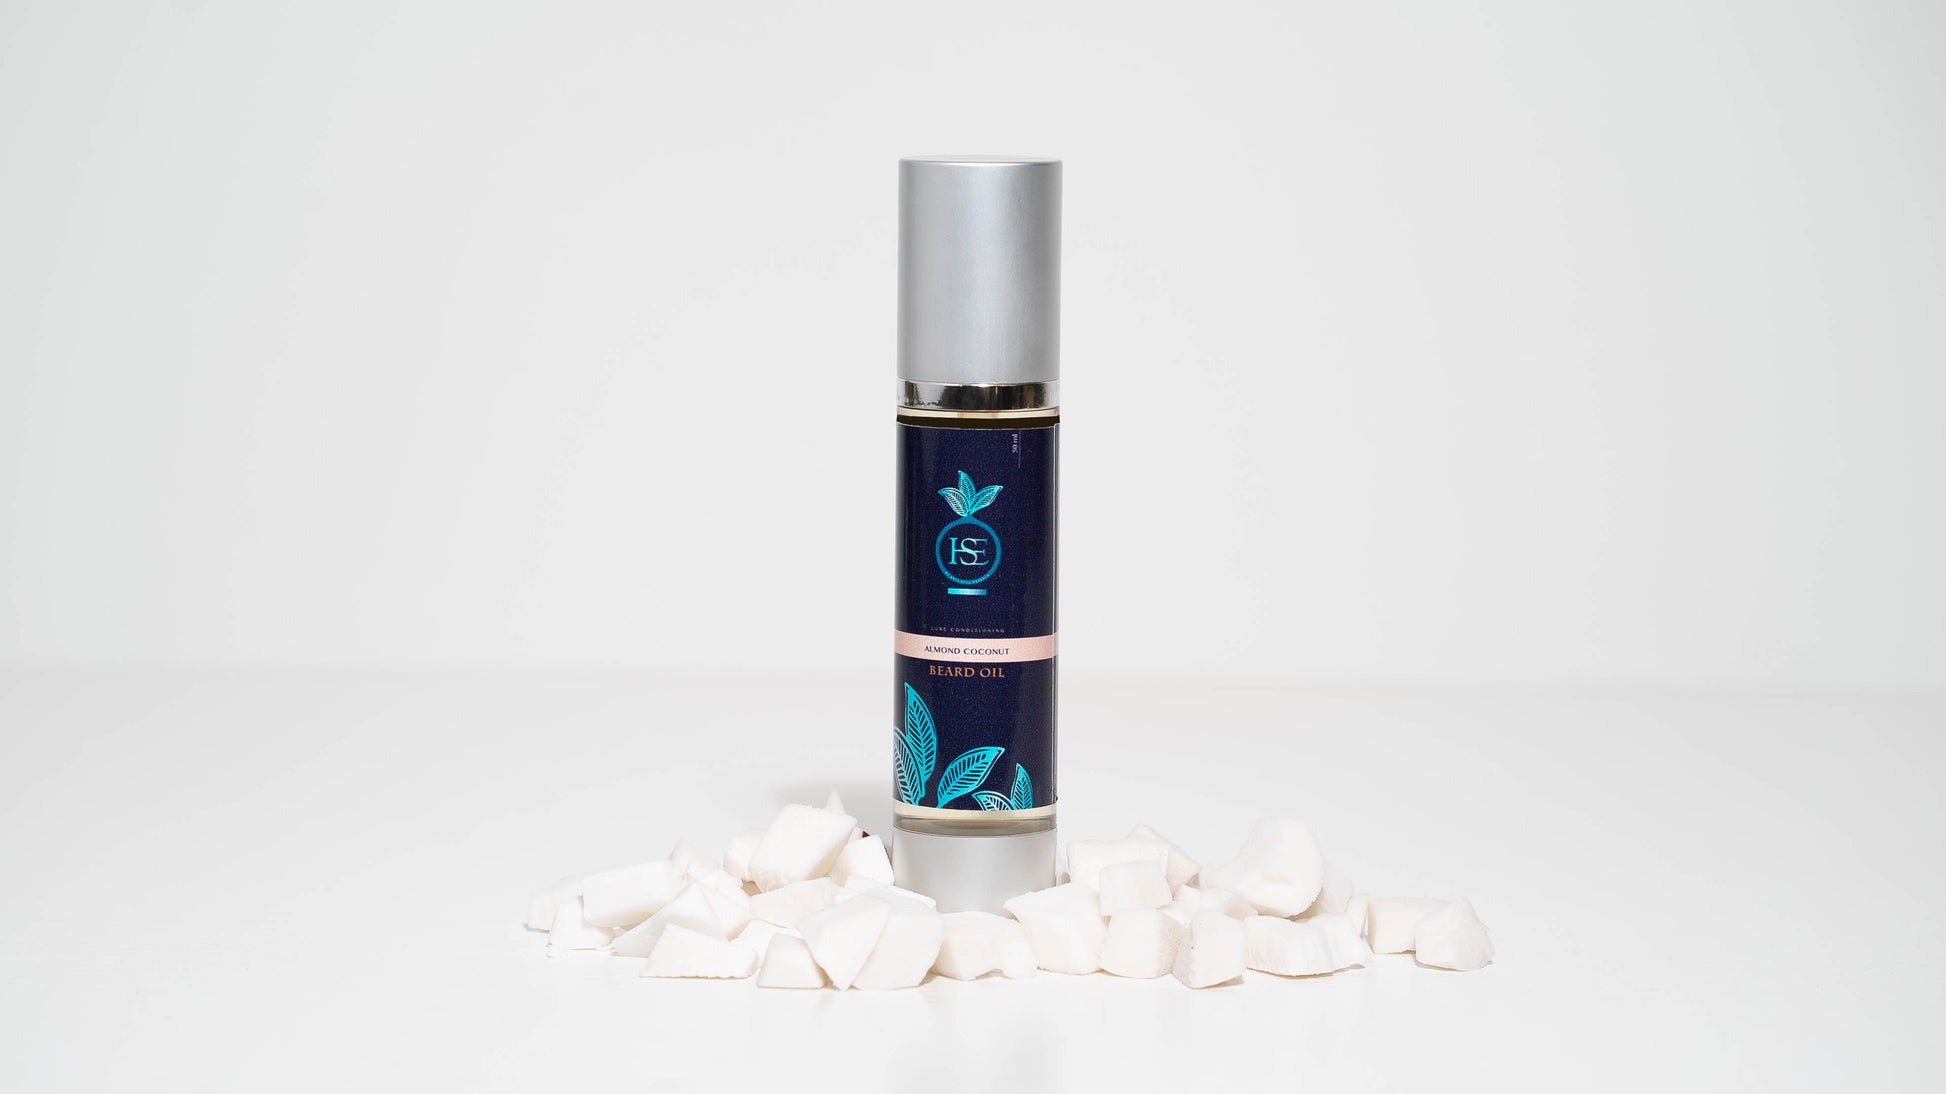 A 30 ml bottle of Almond Coconut Luxe Grooming Oil is centered against a white background, framed by pieces of coconut, highlighting the product's key ingredients and emphasizing its natural, nourishing properties.